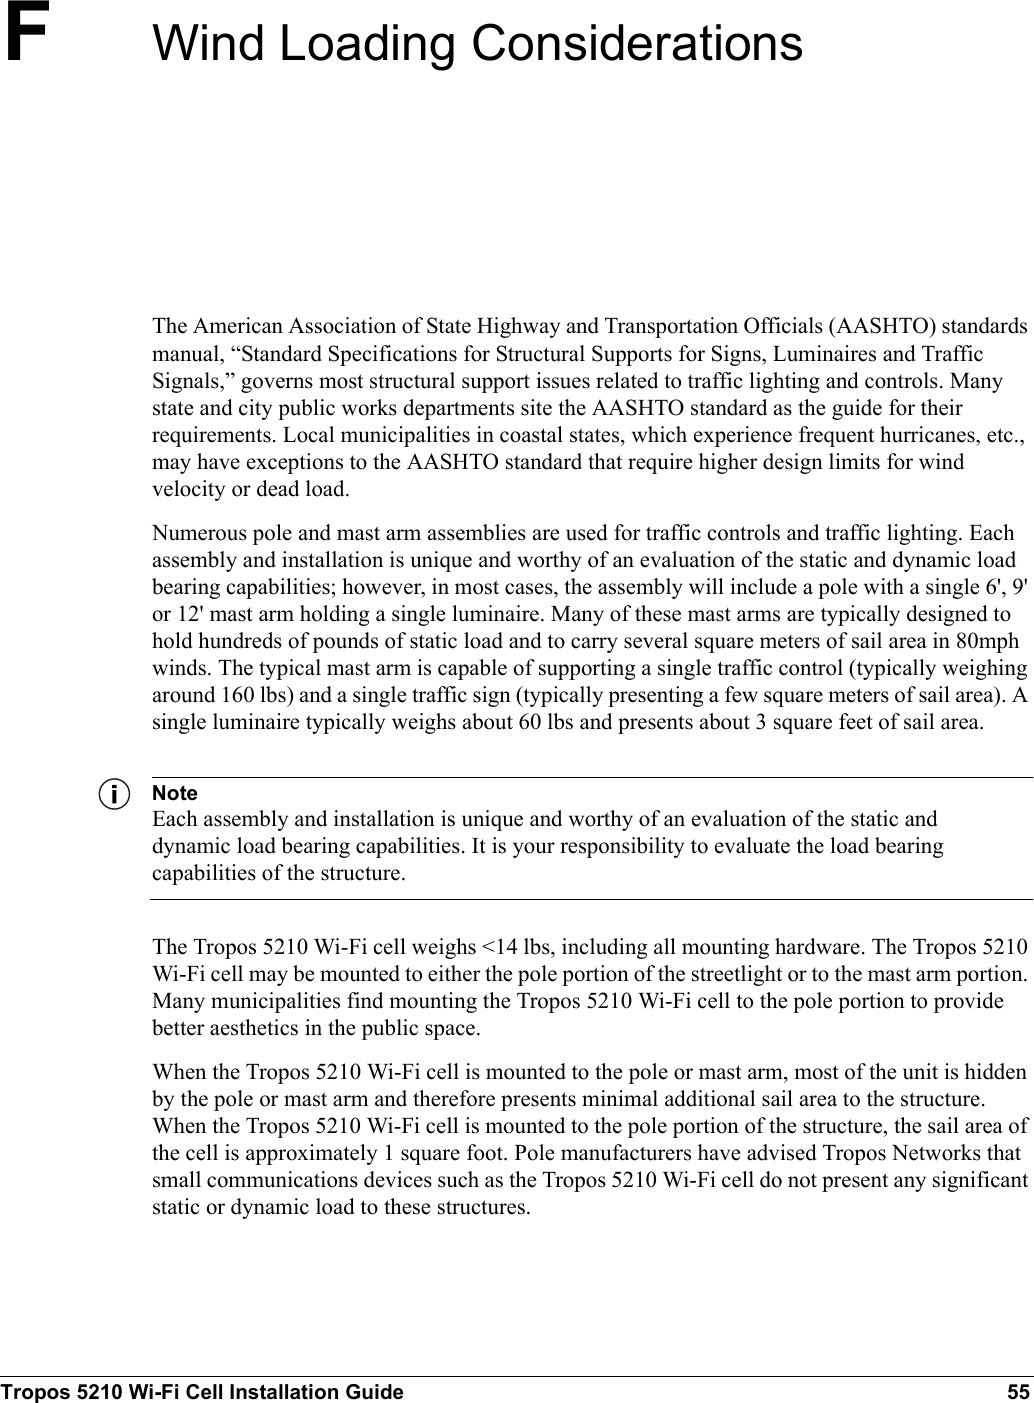 Tropos 5210 Wi-Fi Cell Installation Guide 55FWind Loading ConsiderationsThe American Association of State Highway and Transportation Officials (AASHTO) standards manual, “Standard Specifications for Structural Supports for Signs, Luminaires and Traffic Signals,” governs most structural support issues related to traffic lighting and controls. Many state and city public works departments site the AASHTO standard as the guide for their requirements. Local municipalities in coastal states, which experience frequent hurricanes, etc., may have exceptions to the AASHTO standard that require higher design limits for wind velocity or dead load. Numerous pole and mast arm assemblies are used for traffic controls and traffic lighting. Each assembly and installation is unique and worthy of an evaluation of the static and dynamic load bearing capabilities; however, in most cases, the assembly will include a pole with a single 6&apos;, 9&apos; or 12&apos; mast arm holding a single luminaire. Many of these mast arms are typically designed to hold hundreds of pounds of static load and to carry several square meters of sail area in 80mph winds. The typical mast arm is capable of supporting a single traffic control (typically weighing around 160 lbs) and a single traffic sign (typically presenting a few square meters of sail area). A single luminaire typically weighs about 60 lbs and presents about 3 square feet of sail area. NoteEach assembly and installation is unique and worthy of an evaluation of the static and dynamic load bearing capabilities. It is your responsibility to evaluate the load bearing capabilities of the structure.The Tropos 5210 Wi-Fi cell weighs &lt;14 lbs, including all mounting hardware. The Tropos 5210 Wi-Fi cell may be mounted to either the pole portion of the streetlight or to the mast arm portion. Many municipalities find mounting the Tropos 5210 Wi-Fi cell to the pole portion to provide better aesthetics in the public space. When the Tropos 5210 Wi-Fi cell is mounted to the pole or mast arm, most of the unit is hidden by the pole or mast arm and therefore presents minimal additional sail area to the structure. When the Tropos 5210 Wi-Fi cell is mounted to the pole portion of the structure, the sail area of the cell is approximately 1 square foot. Pole manufacturers have advised Tropos Networks that small communications devices such as the Tropos 5210 Wi-Fi cell do not present any significant static or dynamic load to these structures. 